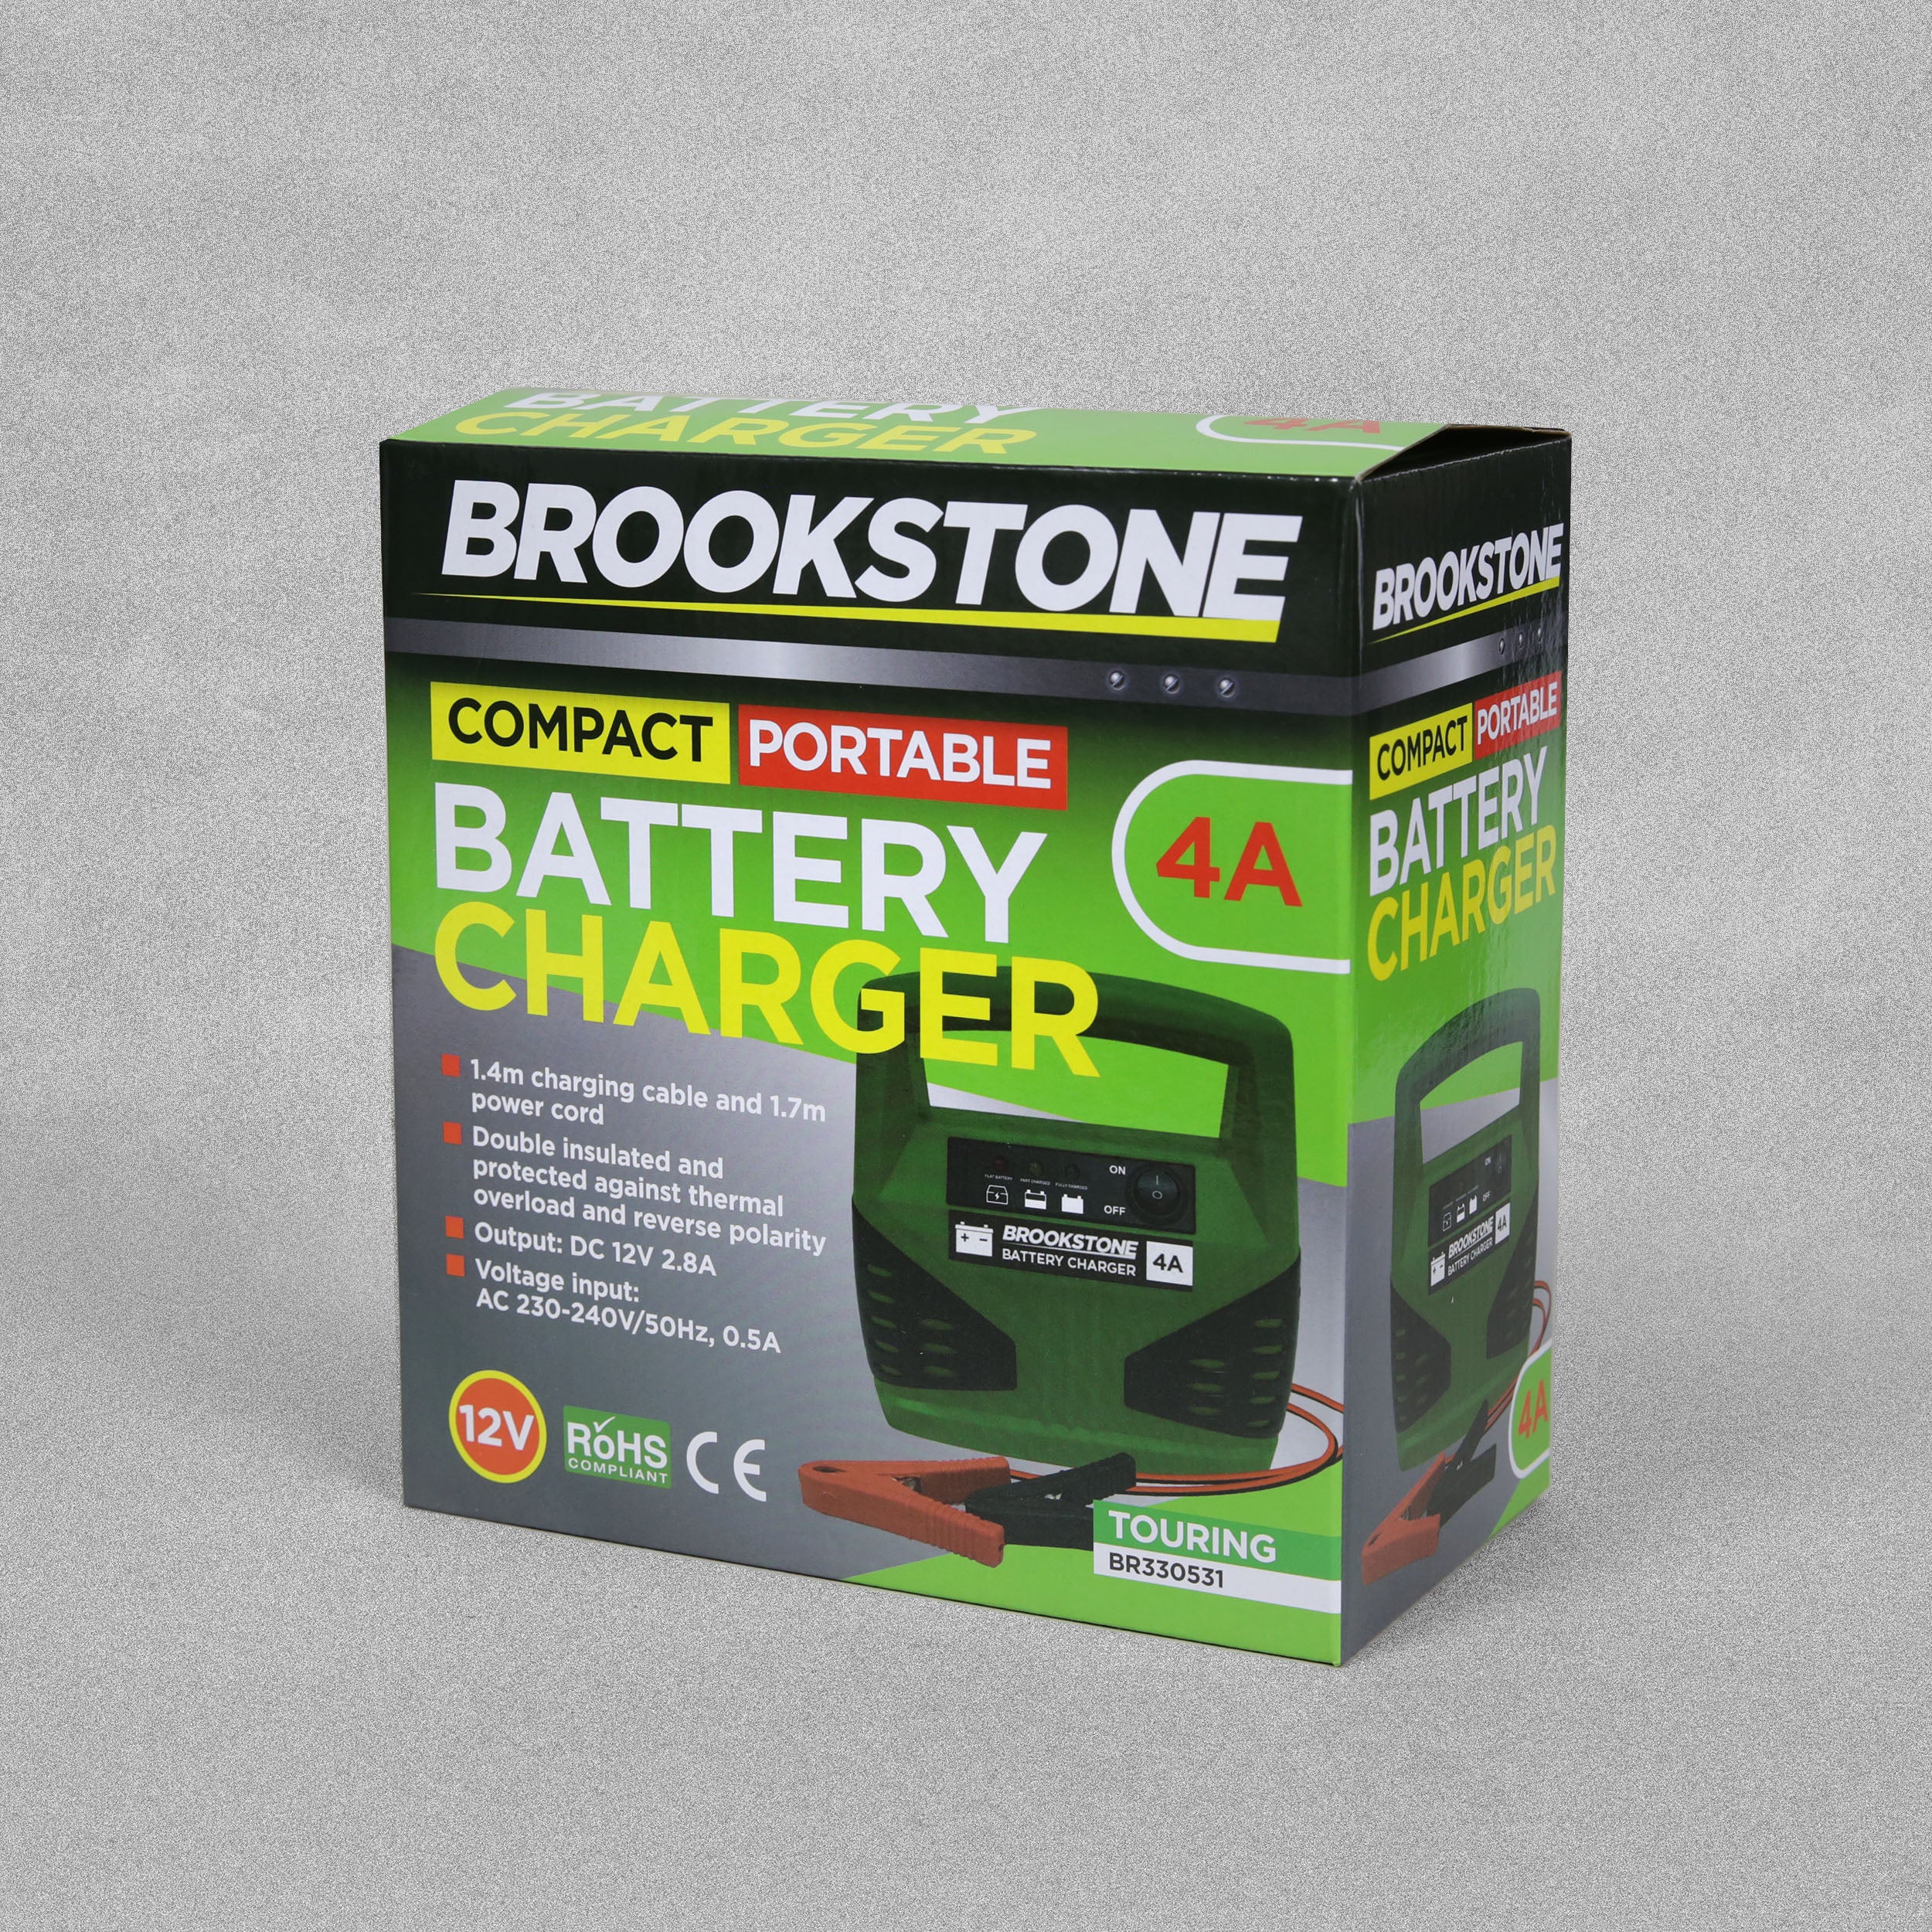 Brookstone Compact Portable Battery Charger 4A 12V